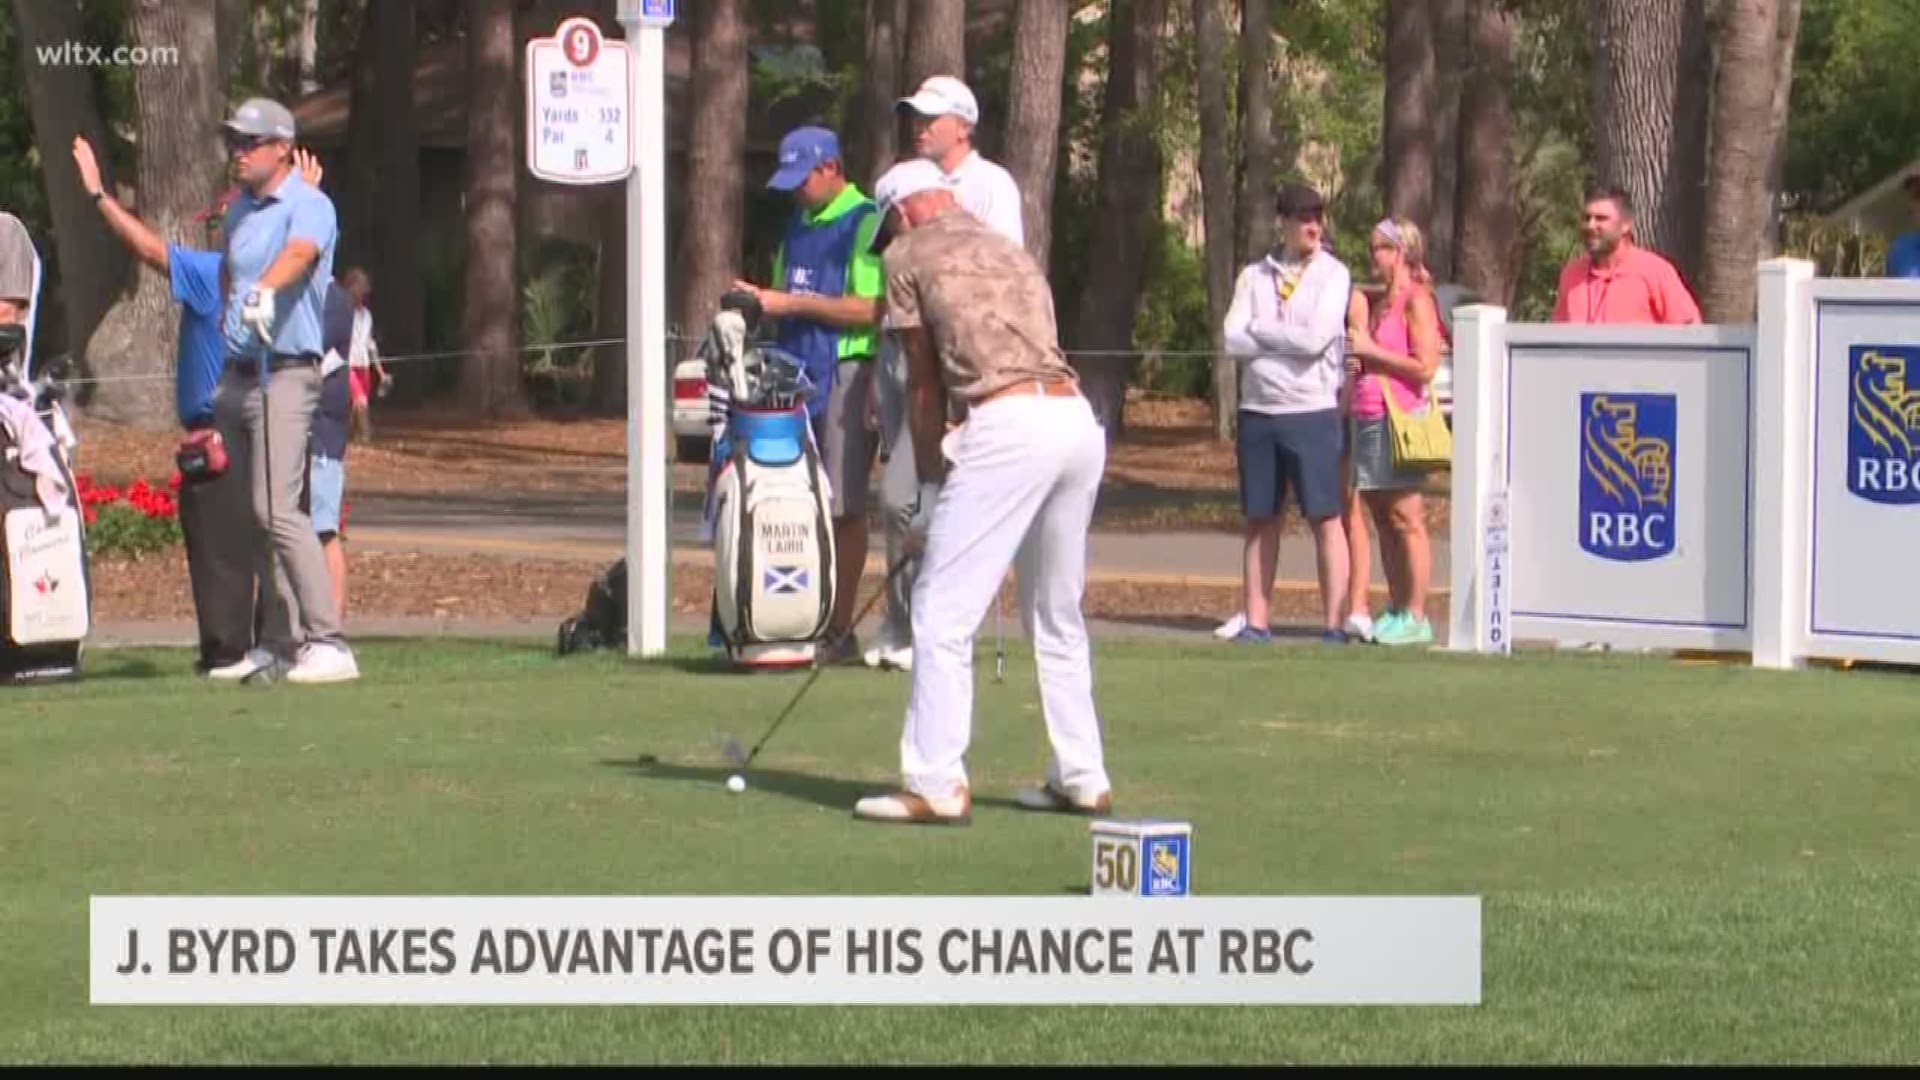 Midlands native Jonathan Byrd will play the weekend at the RBC Heritage.